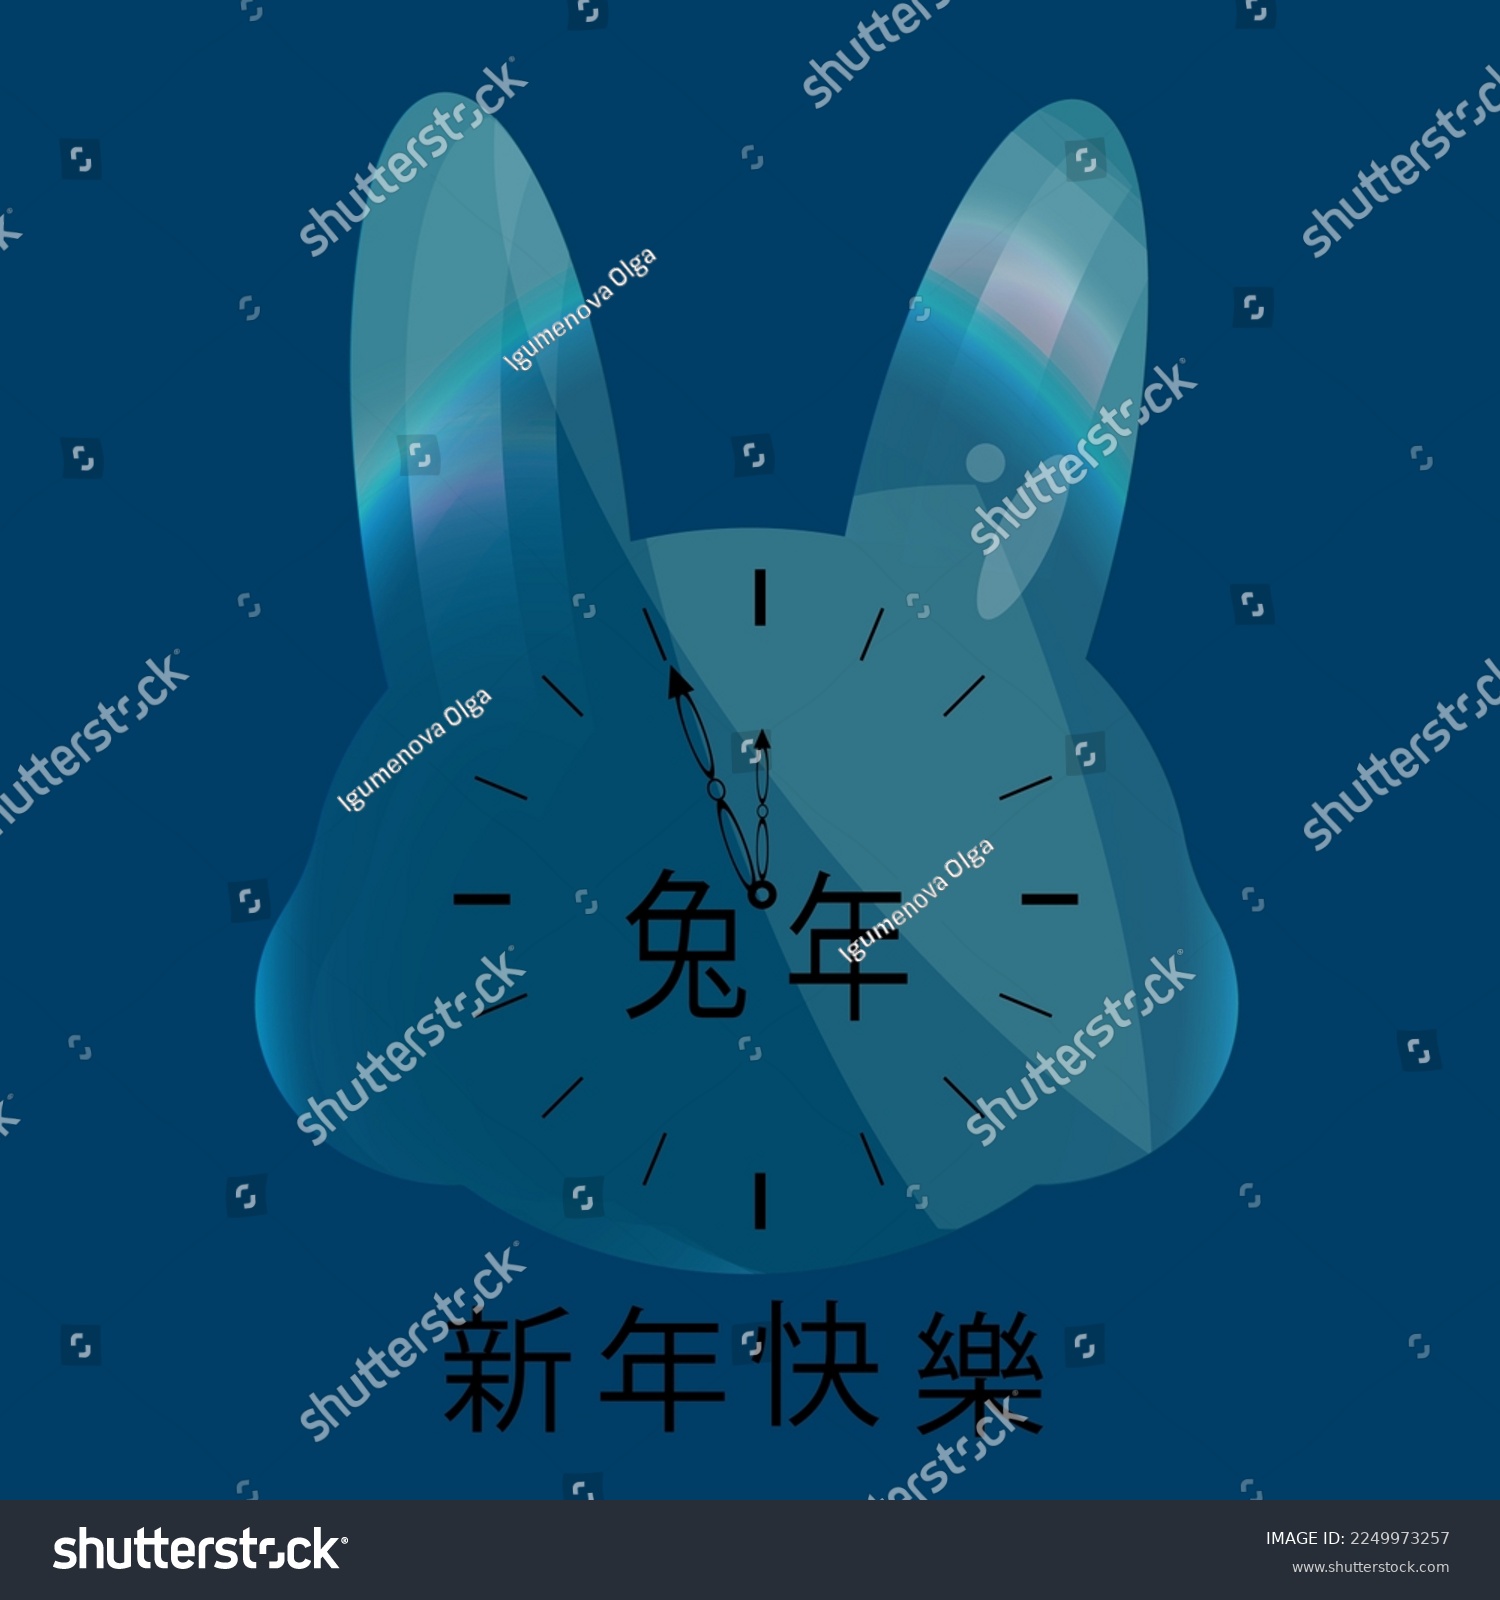 SVG of Greeting card with glass rabbit on blue background. Symbol 2023 new year by chinese luna calendar. Ruby bunny.  新年快樂 - happy new year. 兔子 - rabbit by chinese language. svg